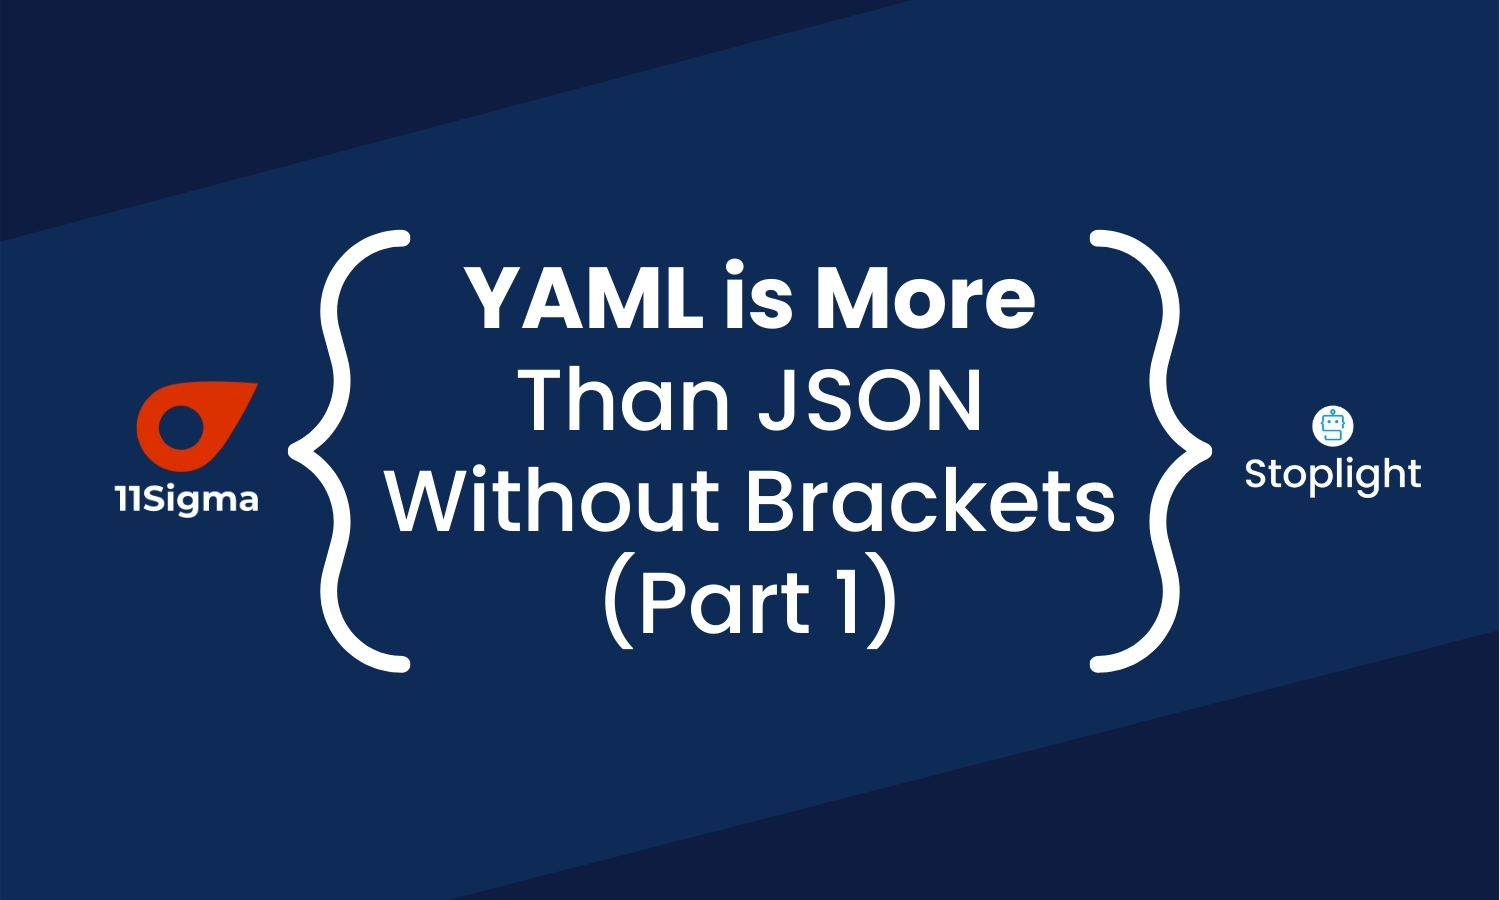 YAML Is More Than JSON Without Brackets (Part 1)